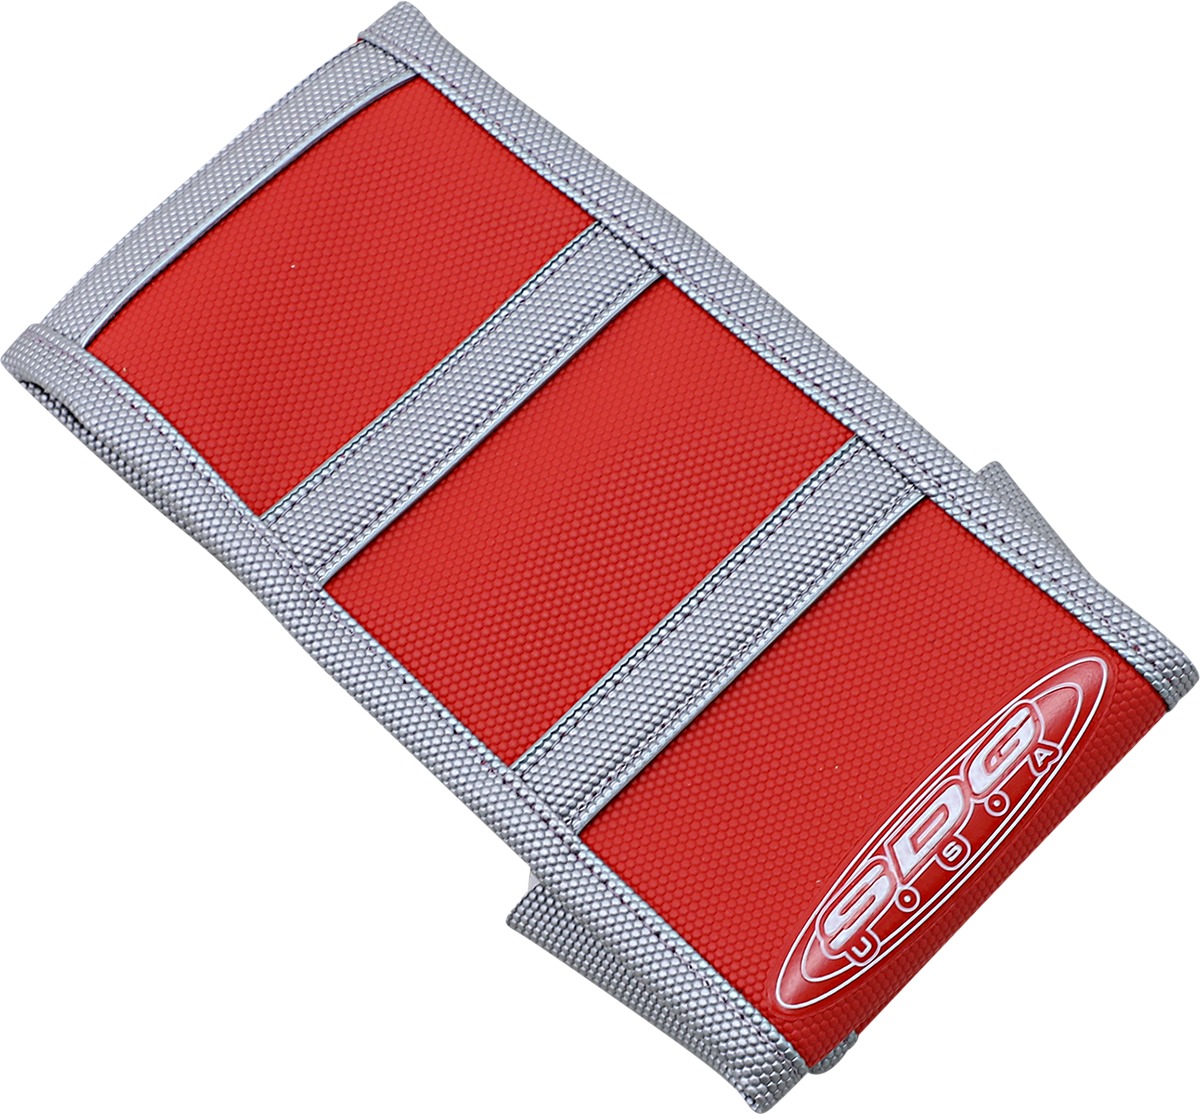 6-Rib Water Resistant Seat Cover - Red Cover, Gray Sides & Ribs - For 17-20 Honda CRF - Click Image to Close